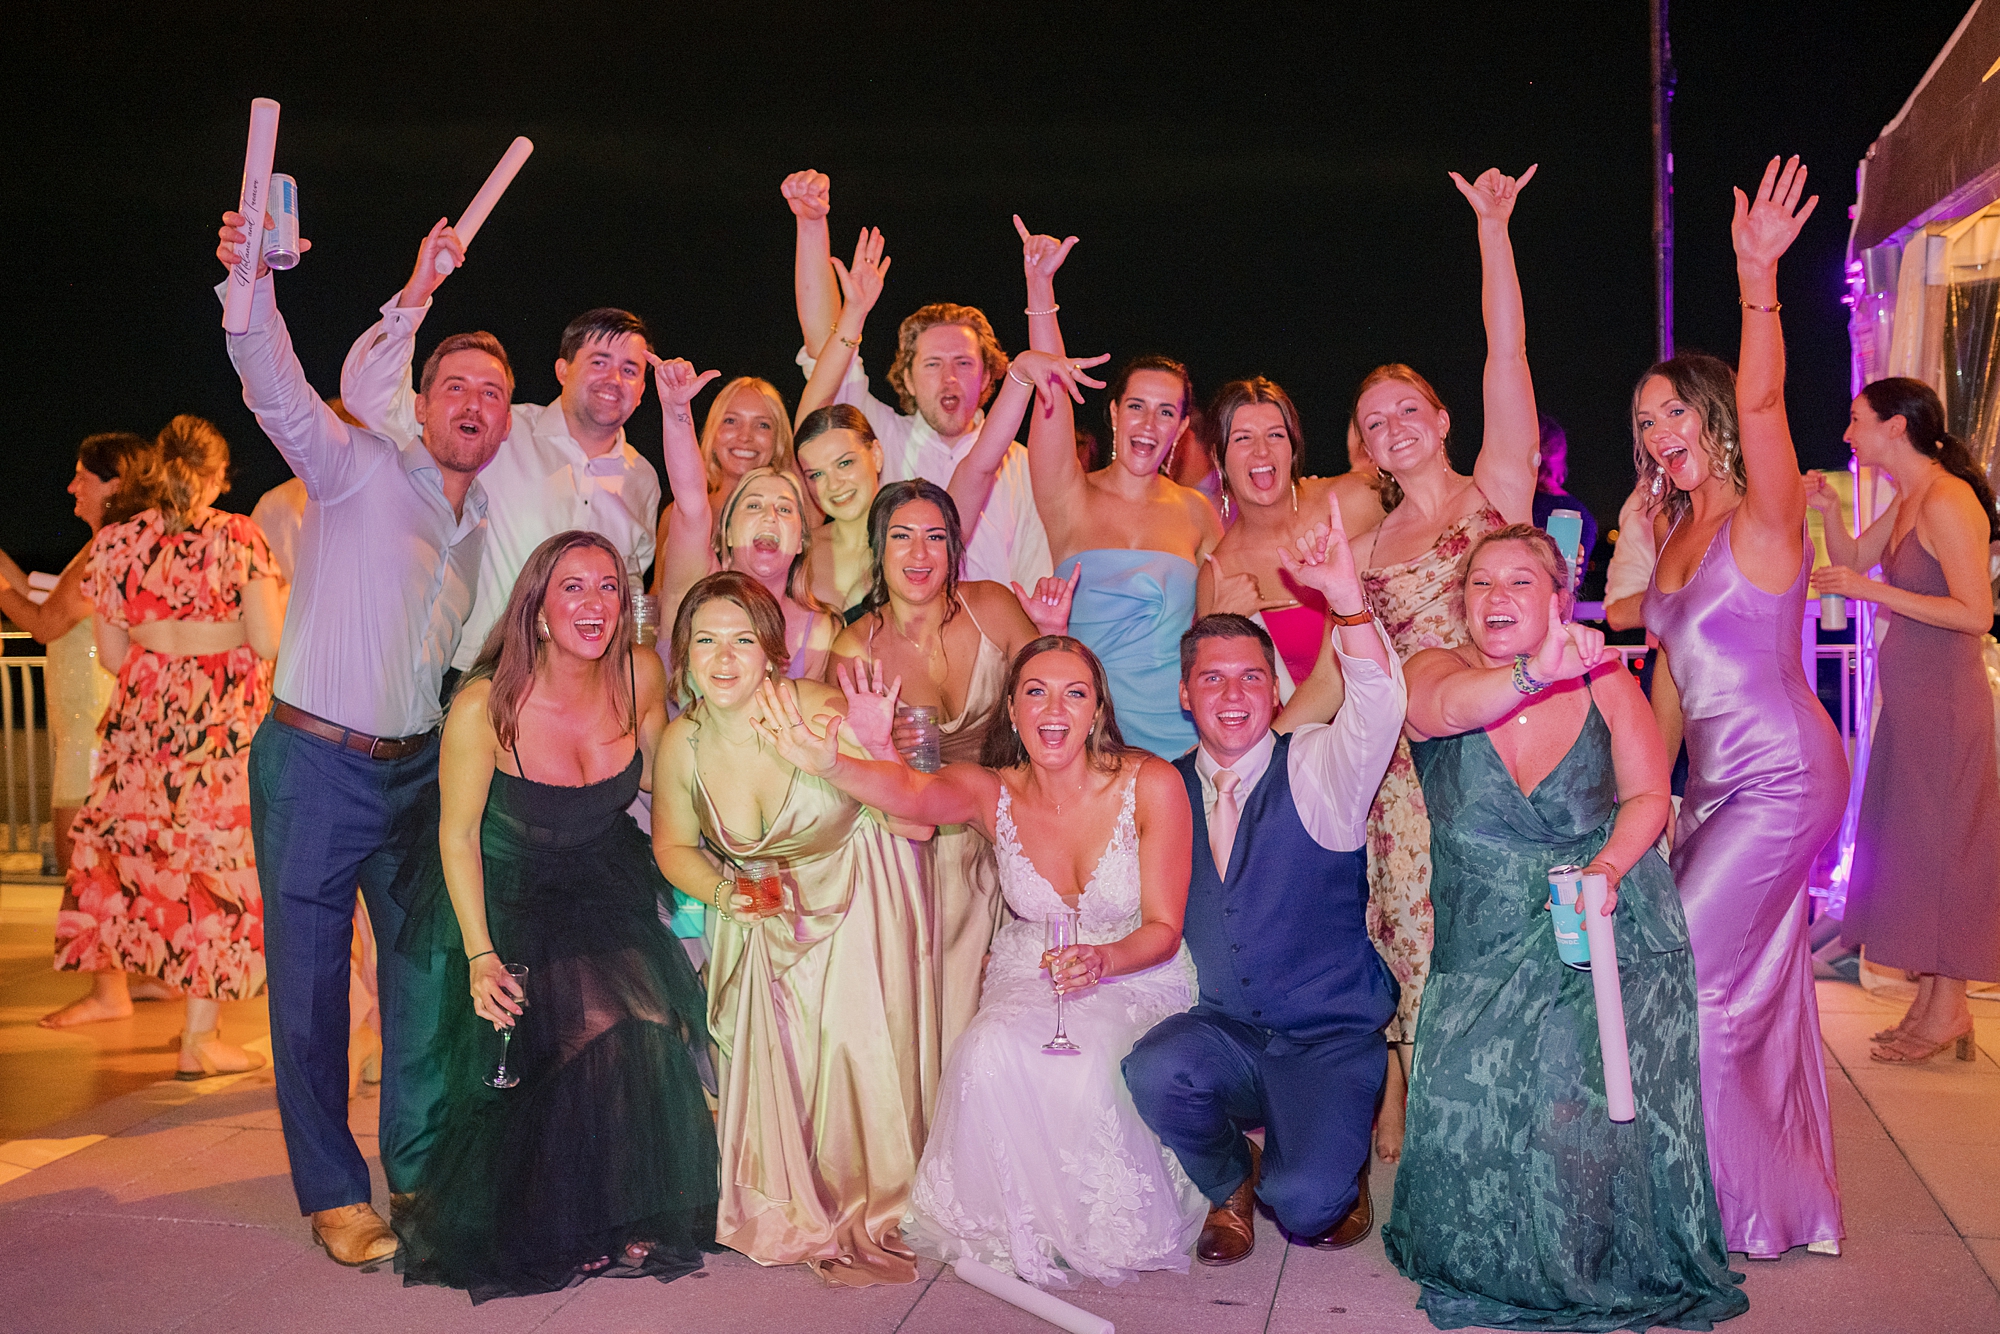 guests pose on side of dance floor at DC wedding reception